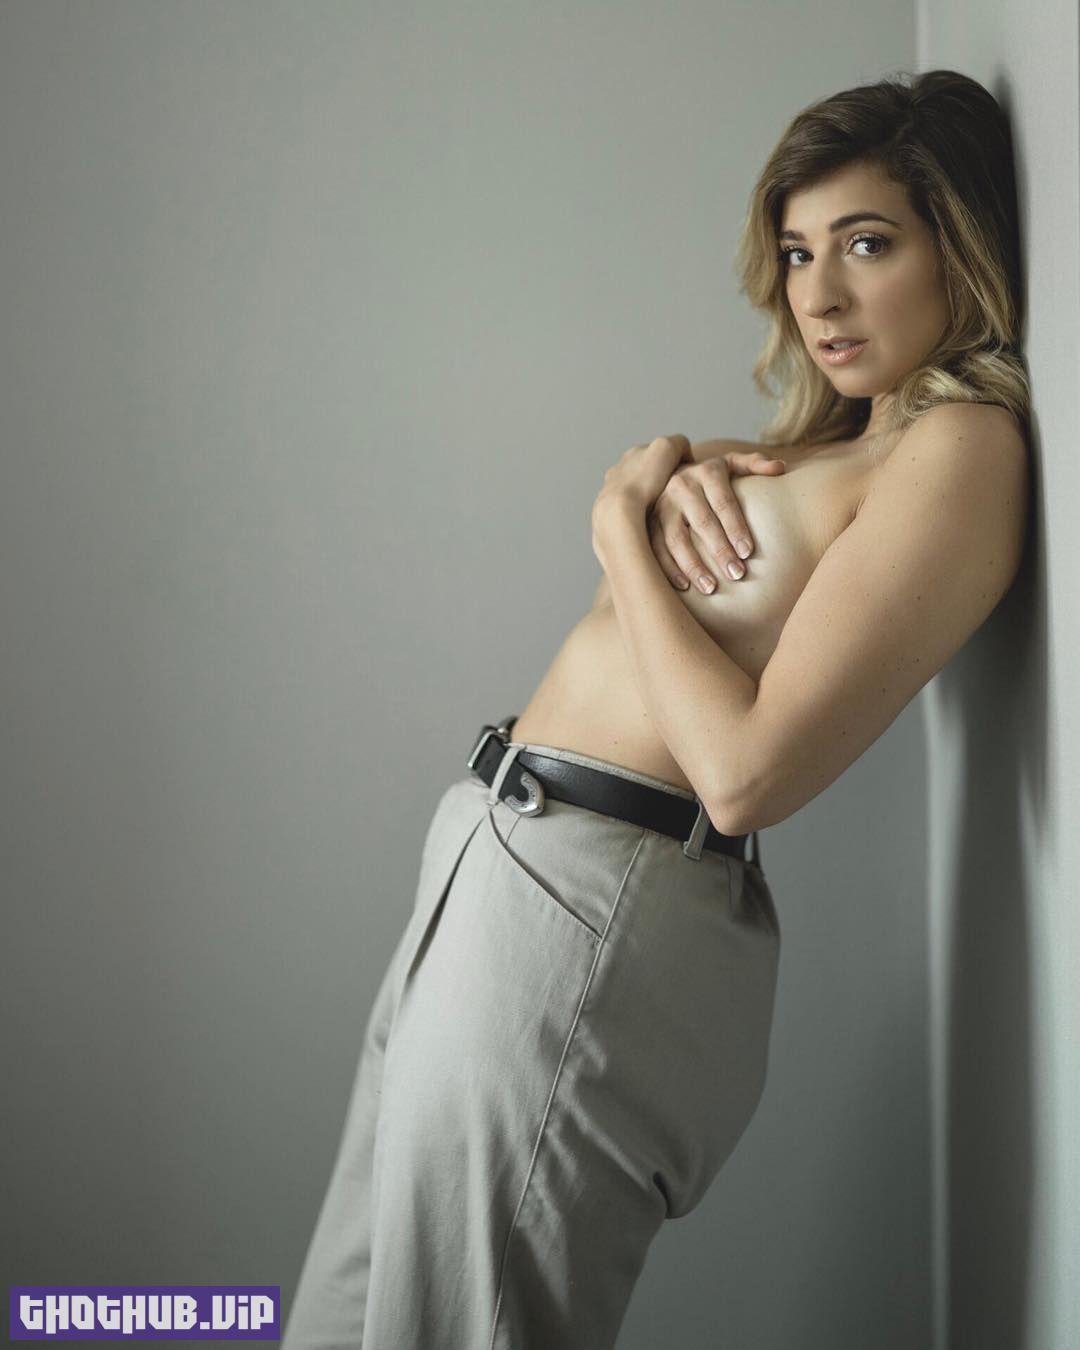 Gabbie Hanna posing Topless covering Boobs with hands